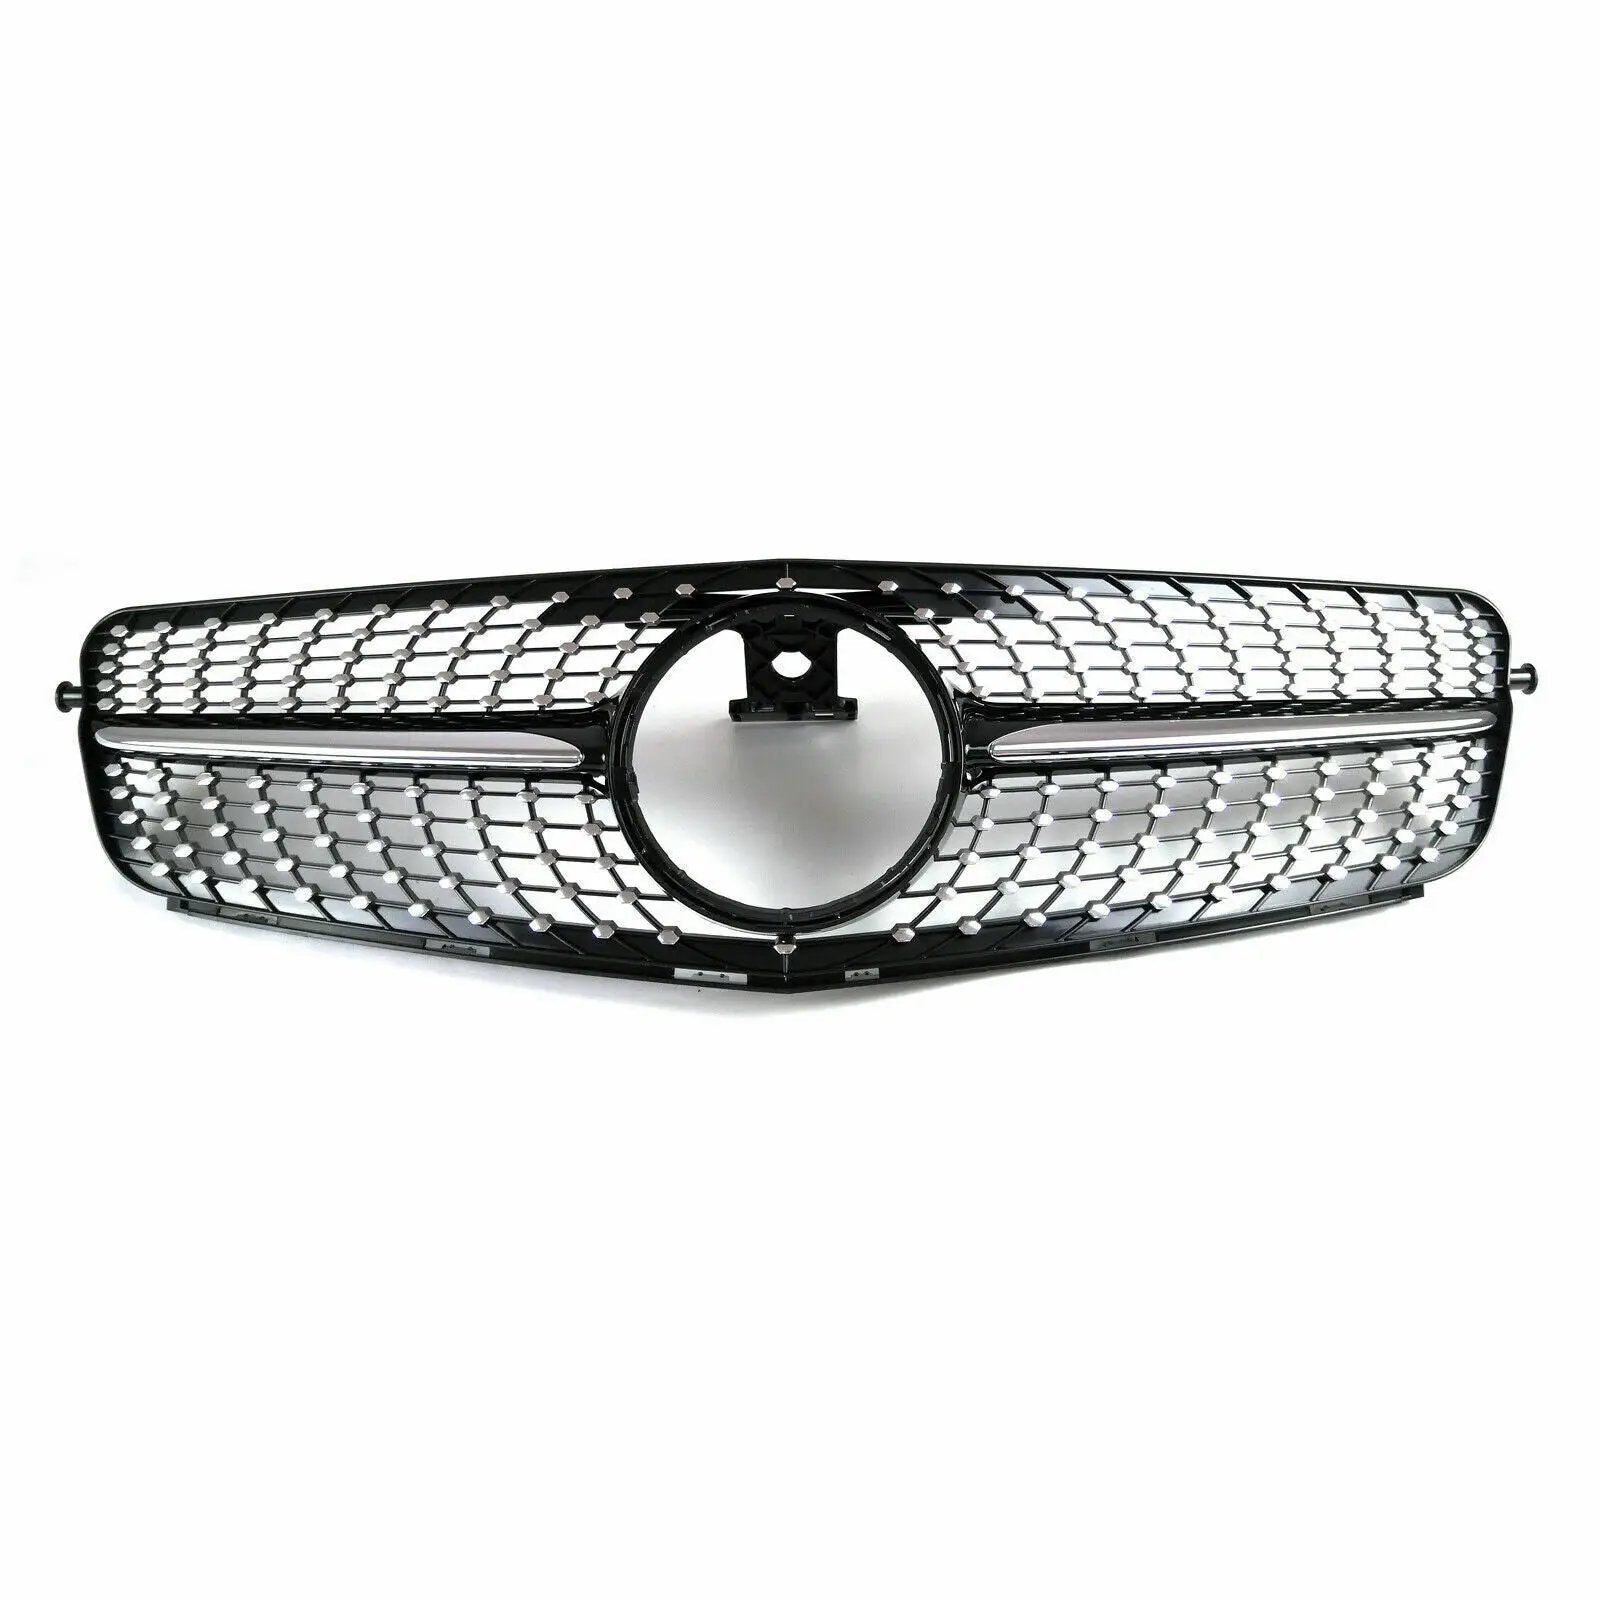 07-14 Mercedes-Benz W204 C200 C300 Black Diamond Style Front Grille Grill